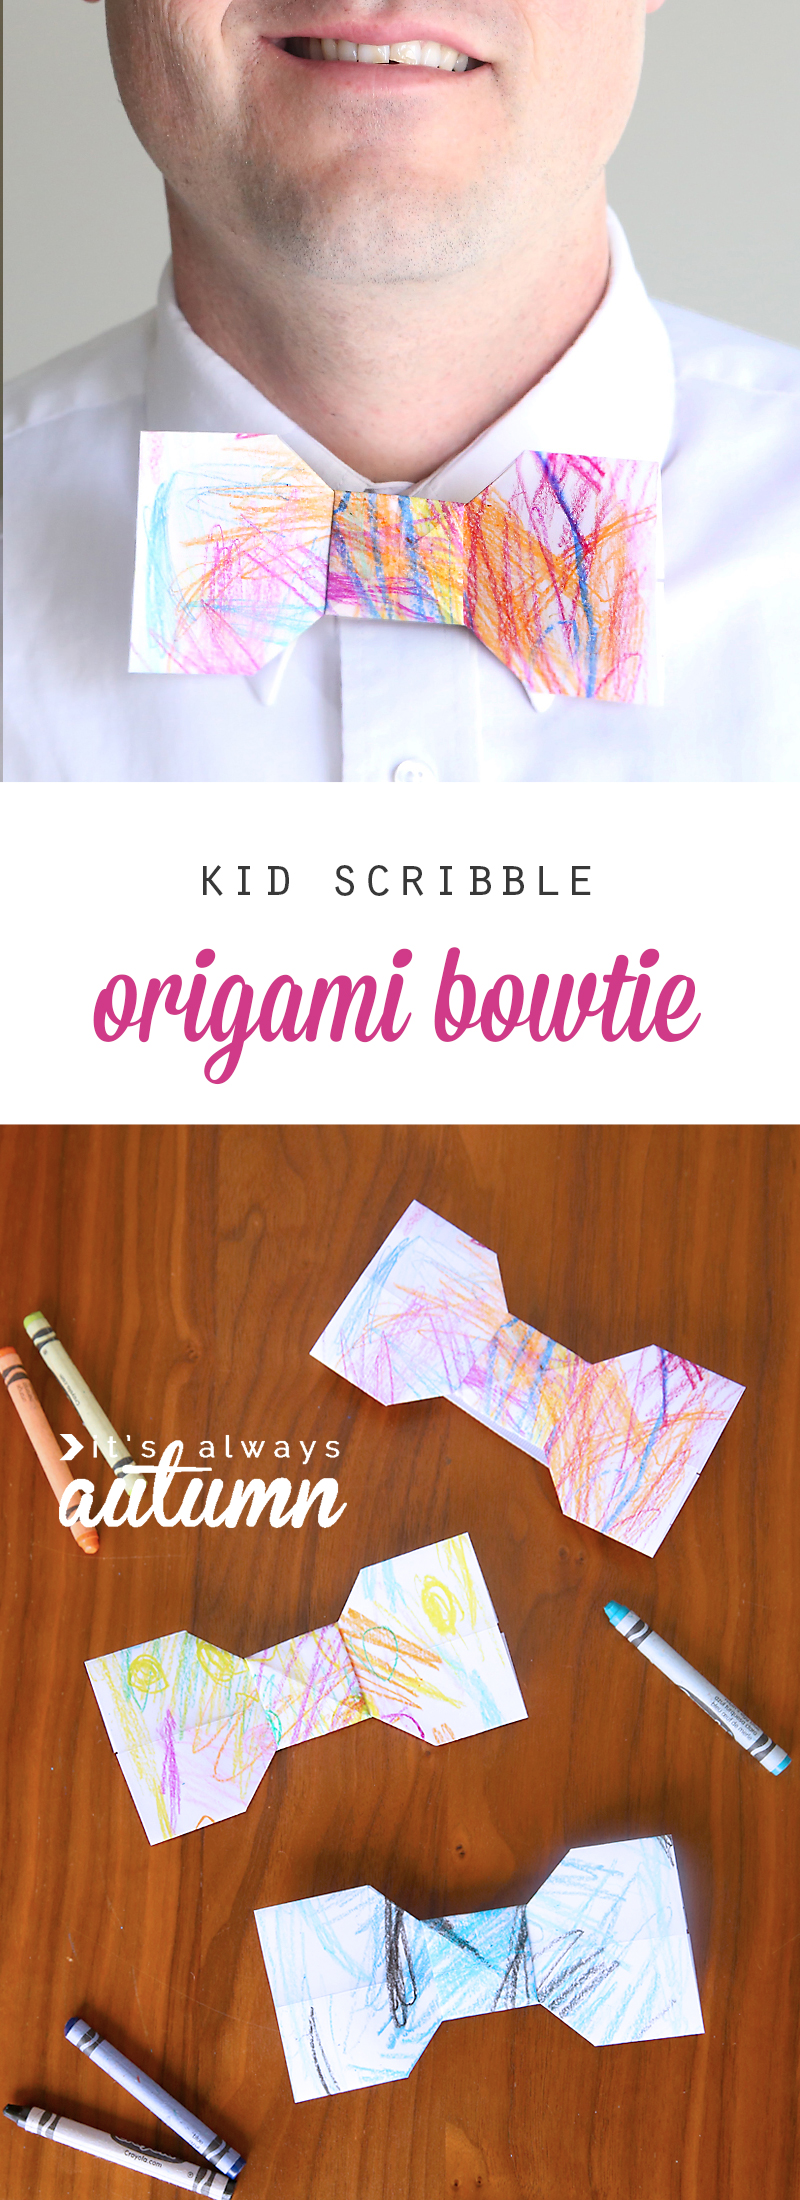 What a fun Father's Day gift kids can make! A kid scribble origami bowtie. Let kids color the paper, then fold up the bowtie and hot glue to a ribbon so Dad can wear it. Click through for folding video.